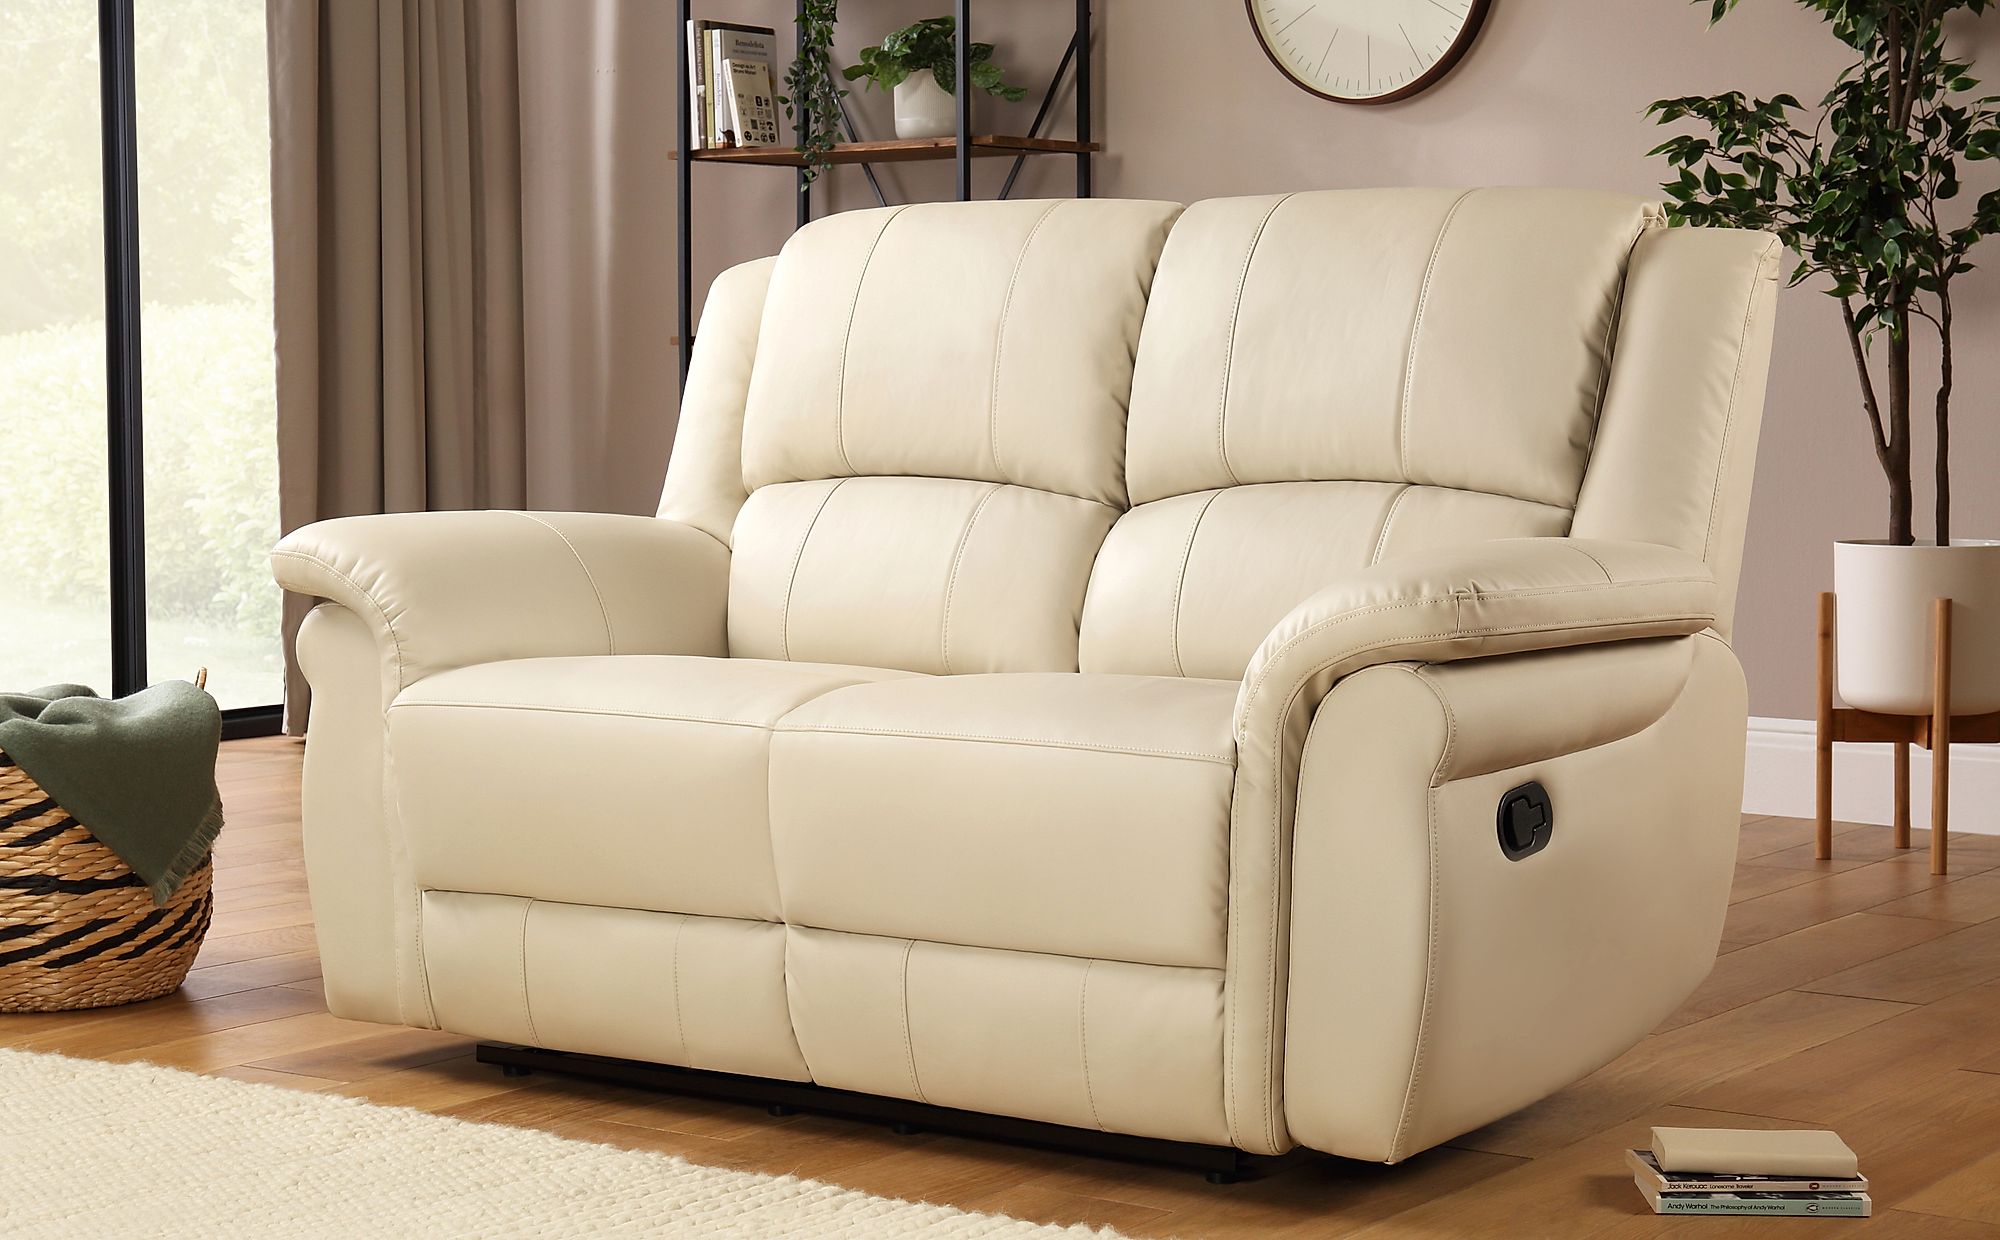 2 seater leather recliner sofa dfs